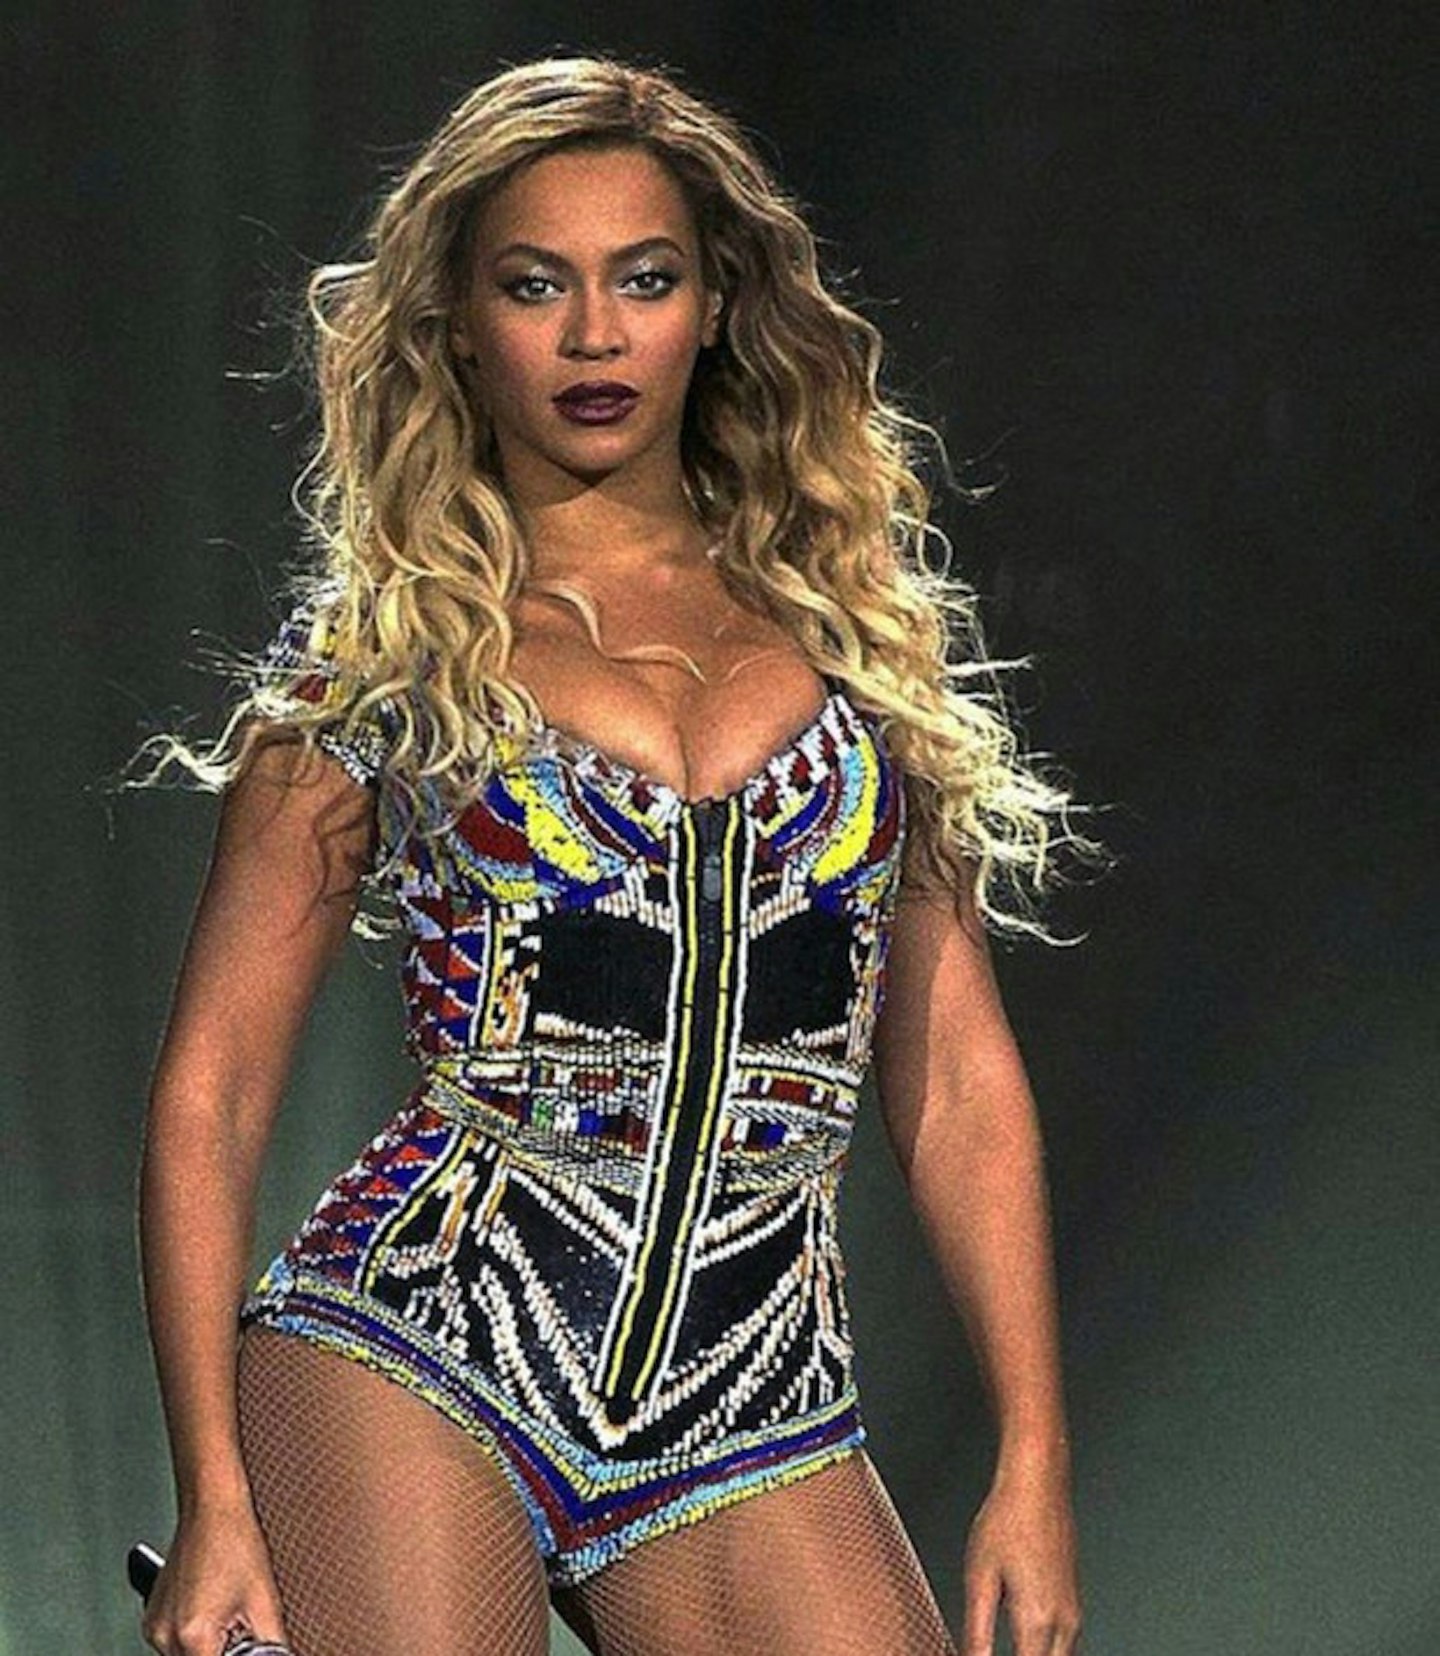 Stage Bey in 2014